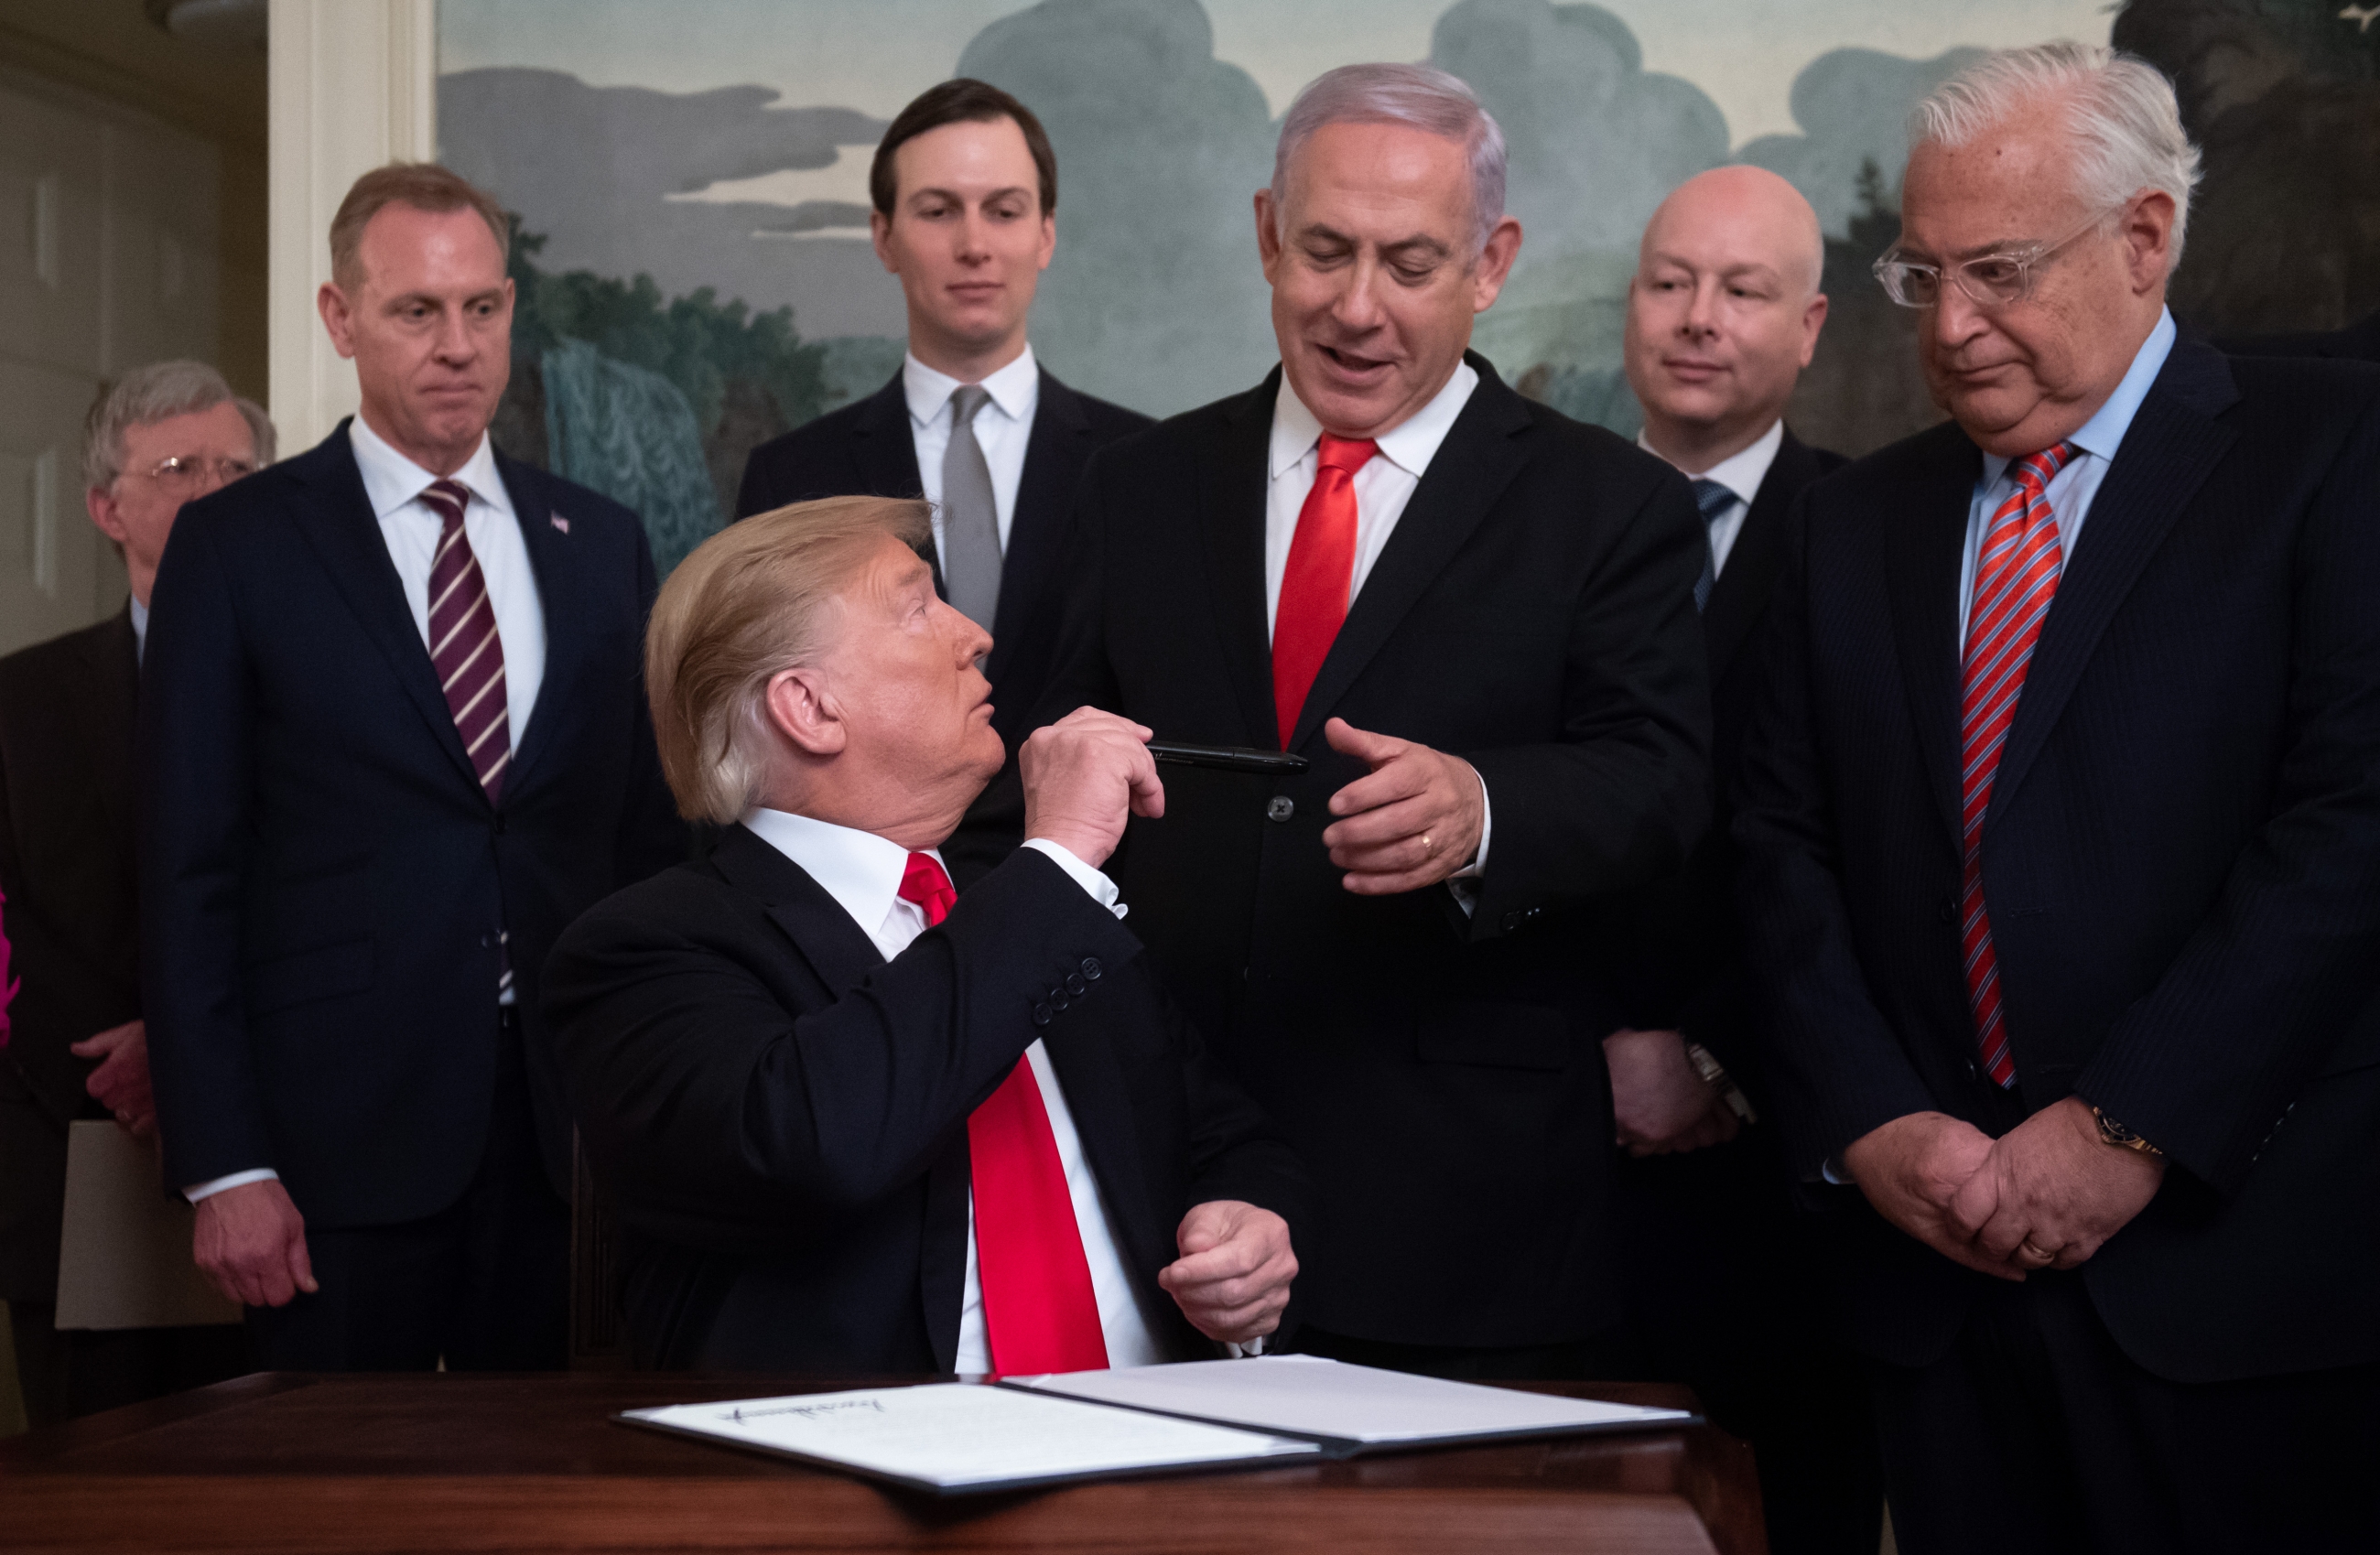 This image of Donald Trump handing Benjamin Netanyahu a pen was used in J Street's promotion